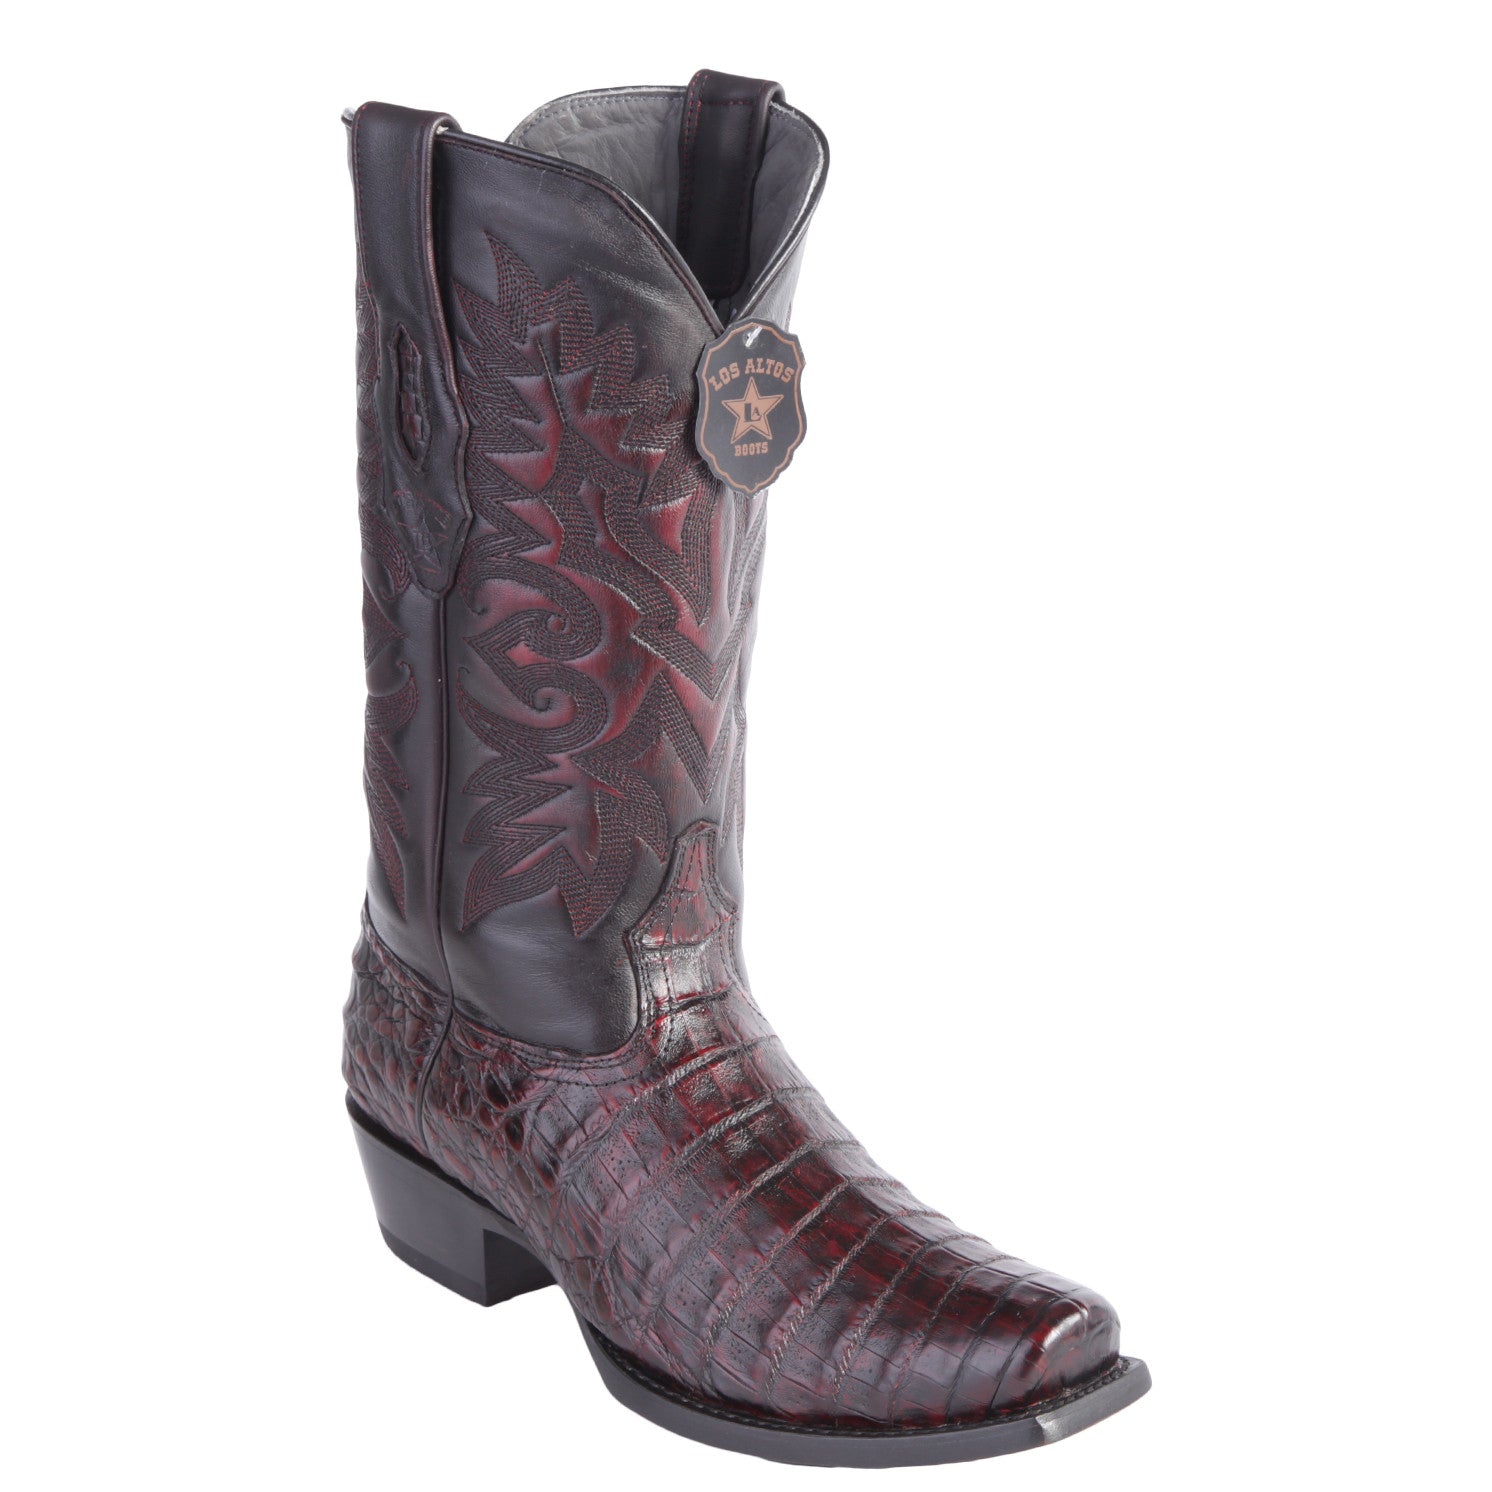 Black Cherry Caiman Belly Cowboy Boots 7-Toe